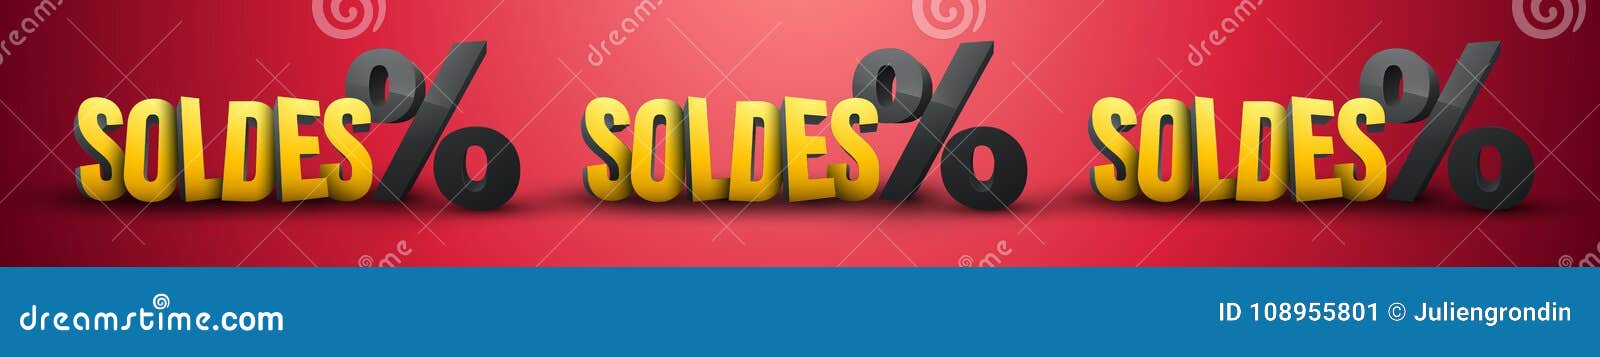 sale in french : soldes